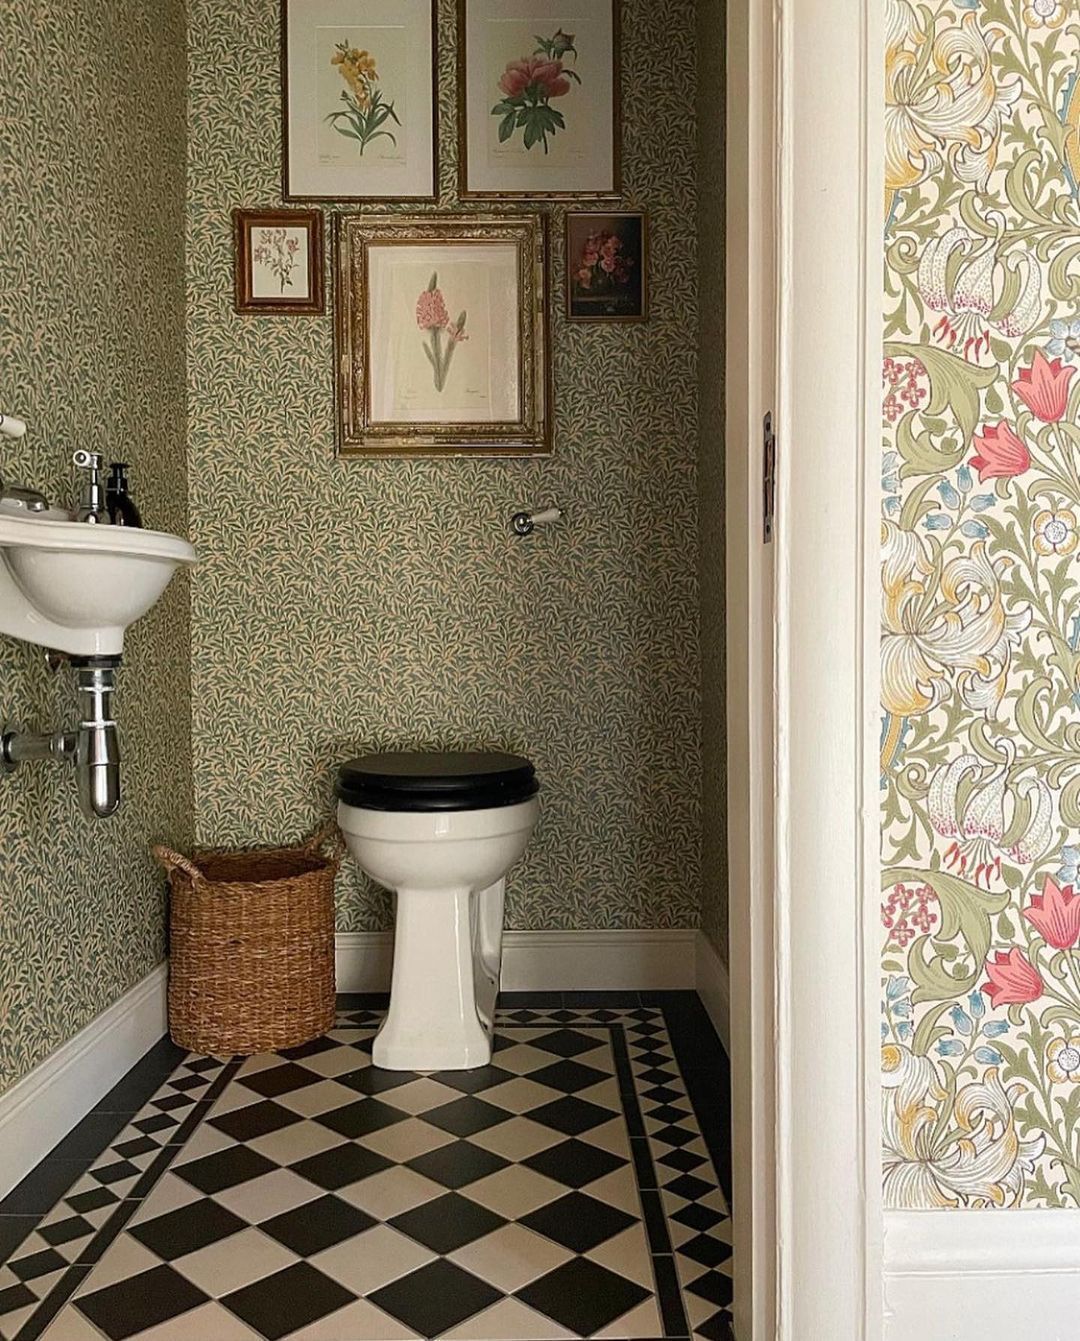 Pretty Behind Toilet Decor With Unique Patterns